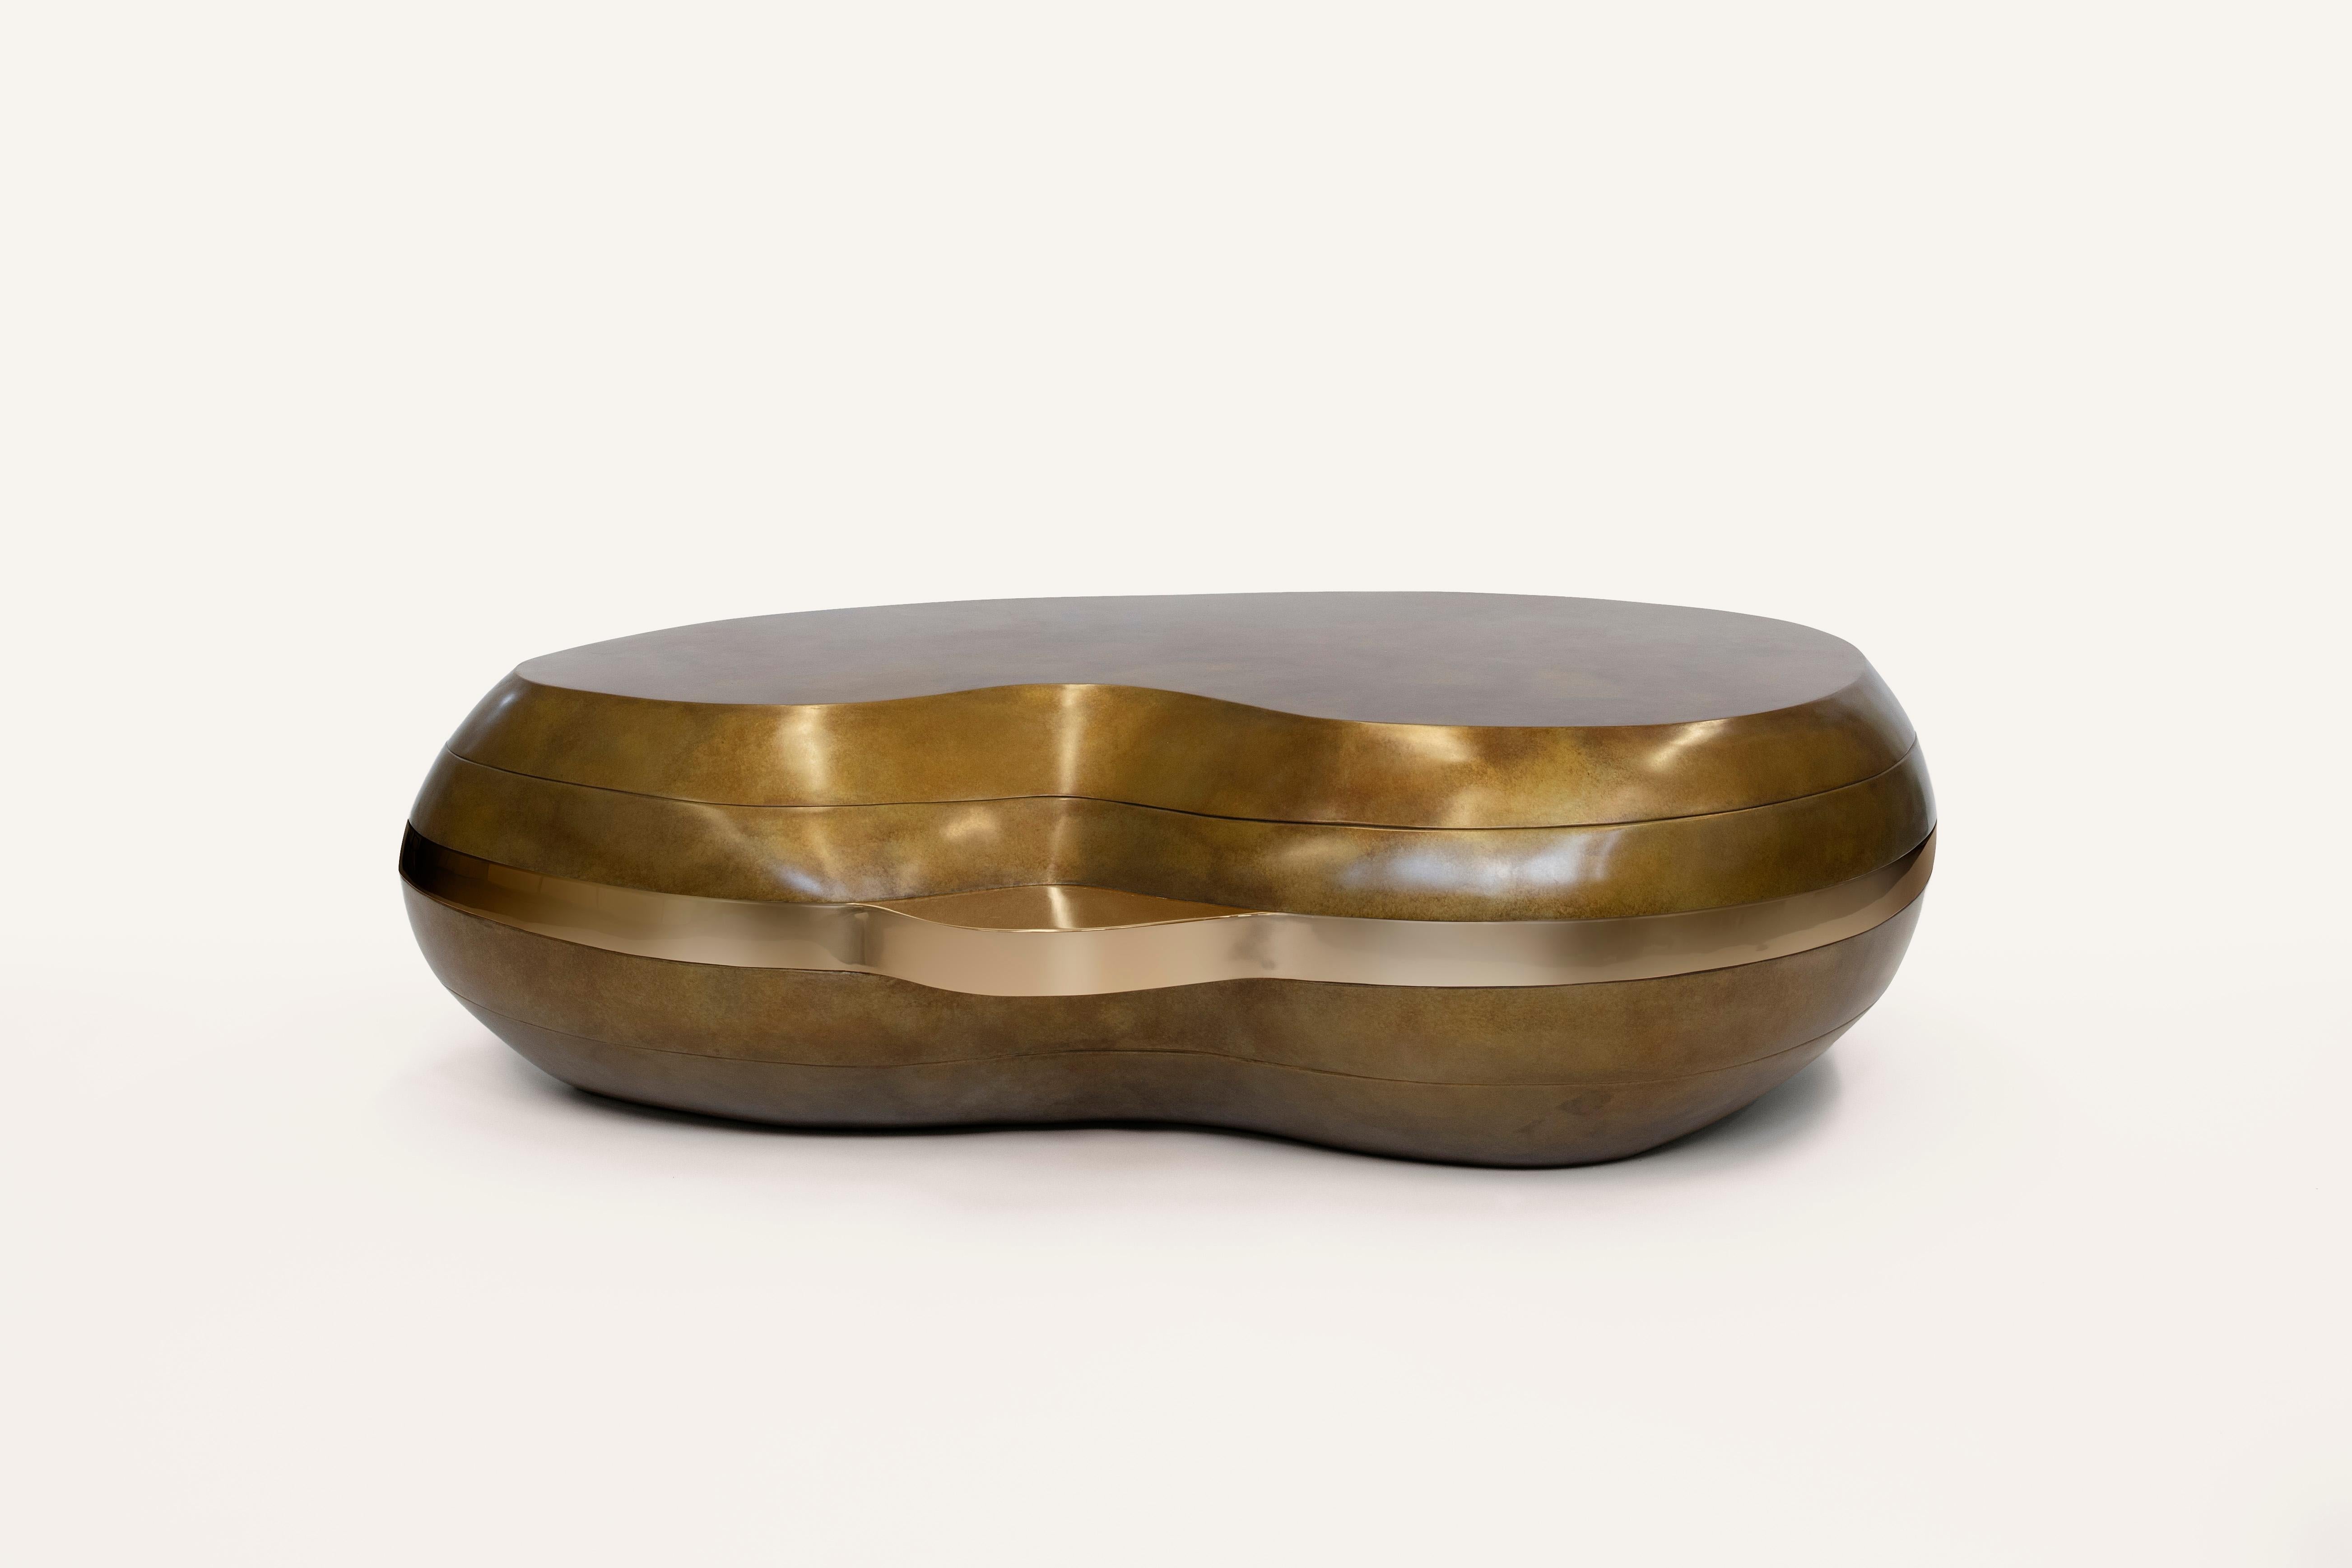 Part of our Stone Collection, the Layered coffee table was inspired by the soft curves and distinct layers of tumbled stones from the sea. This table showcases meticulously hand-sculpted, convex layers of bronze with a hand-patina finish. A center,